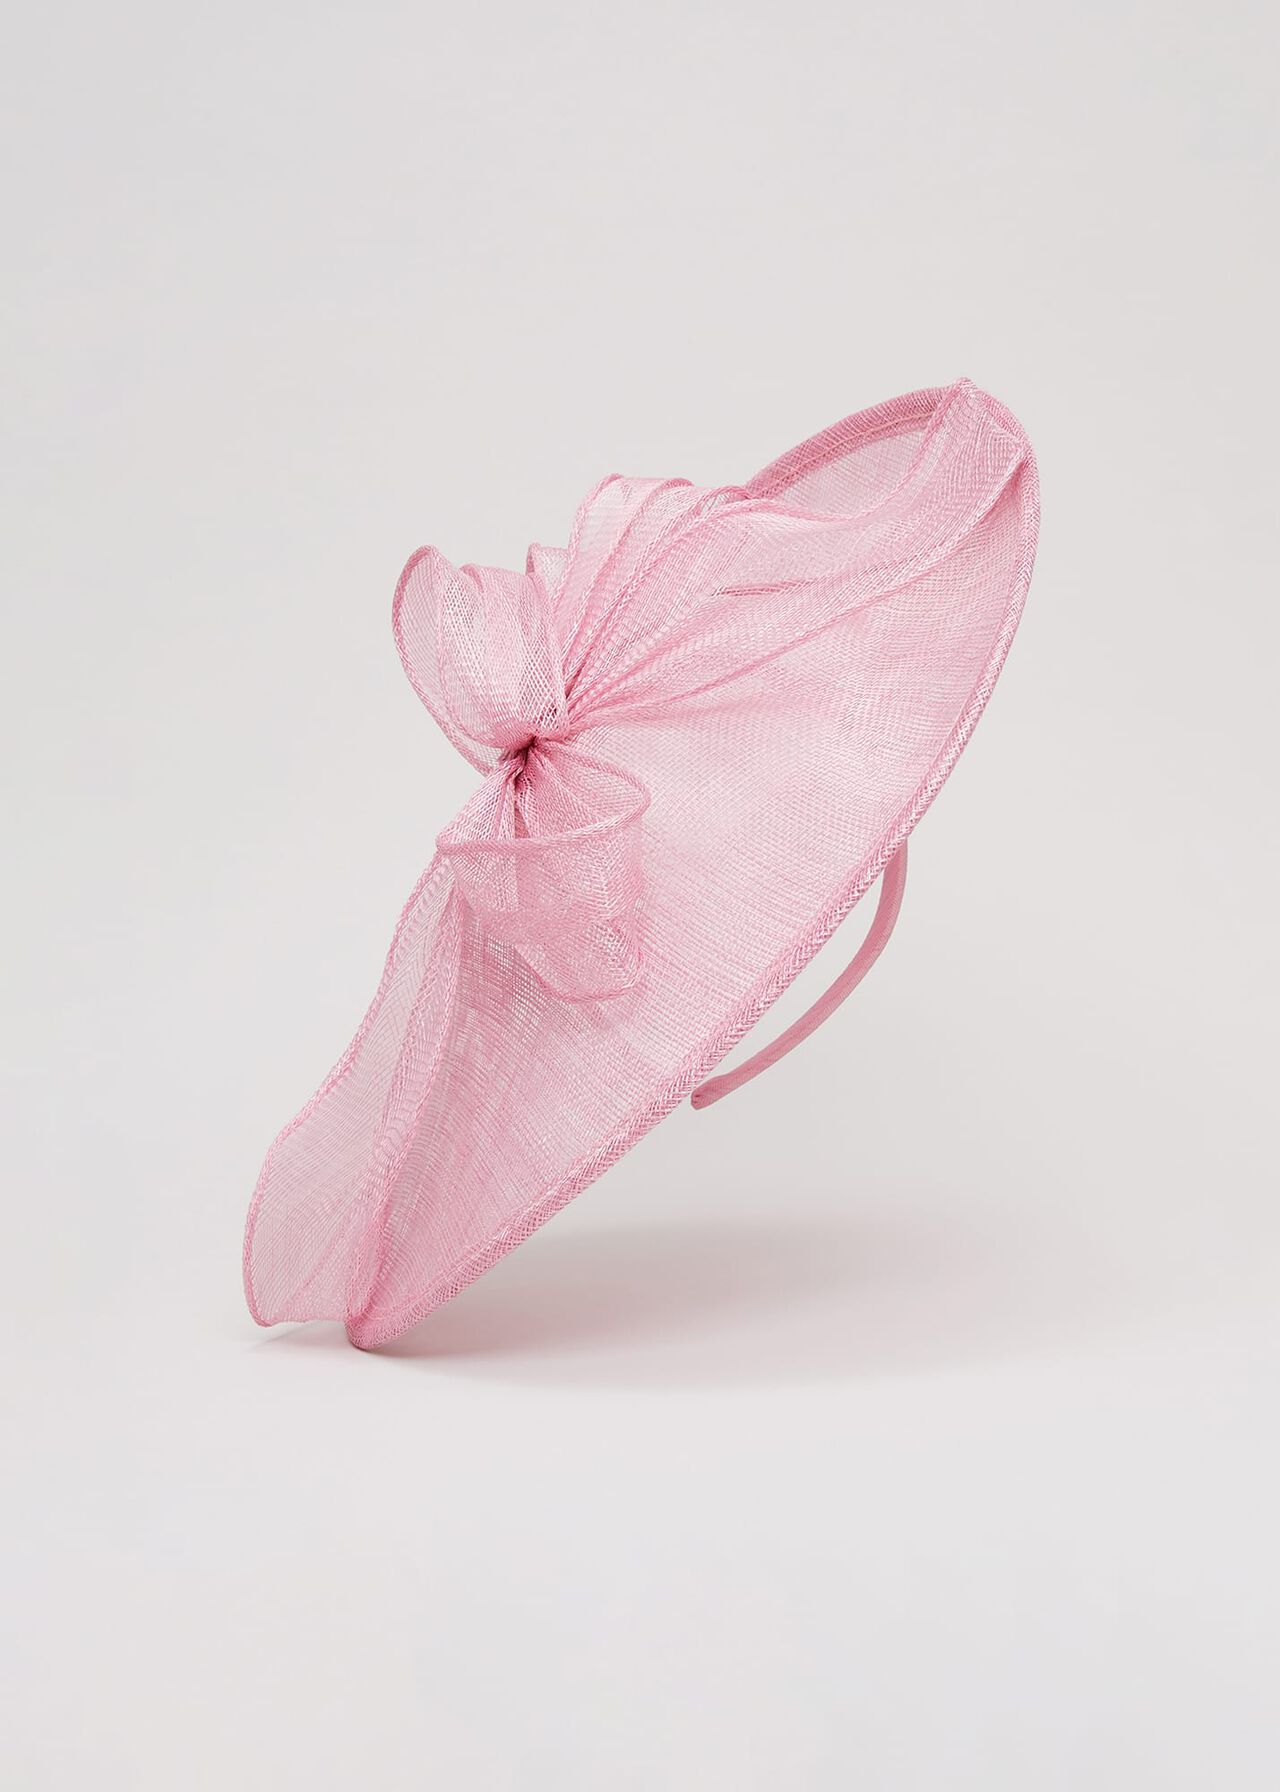 Bow Detail Oval Fascinator